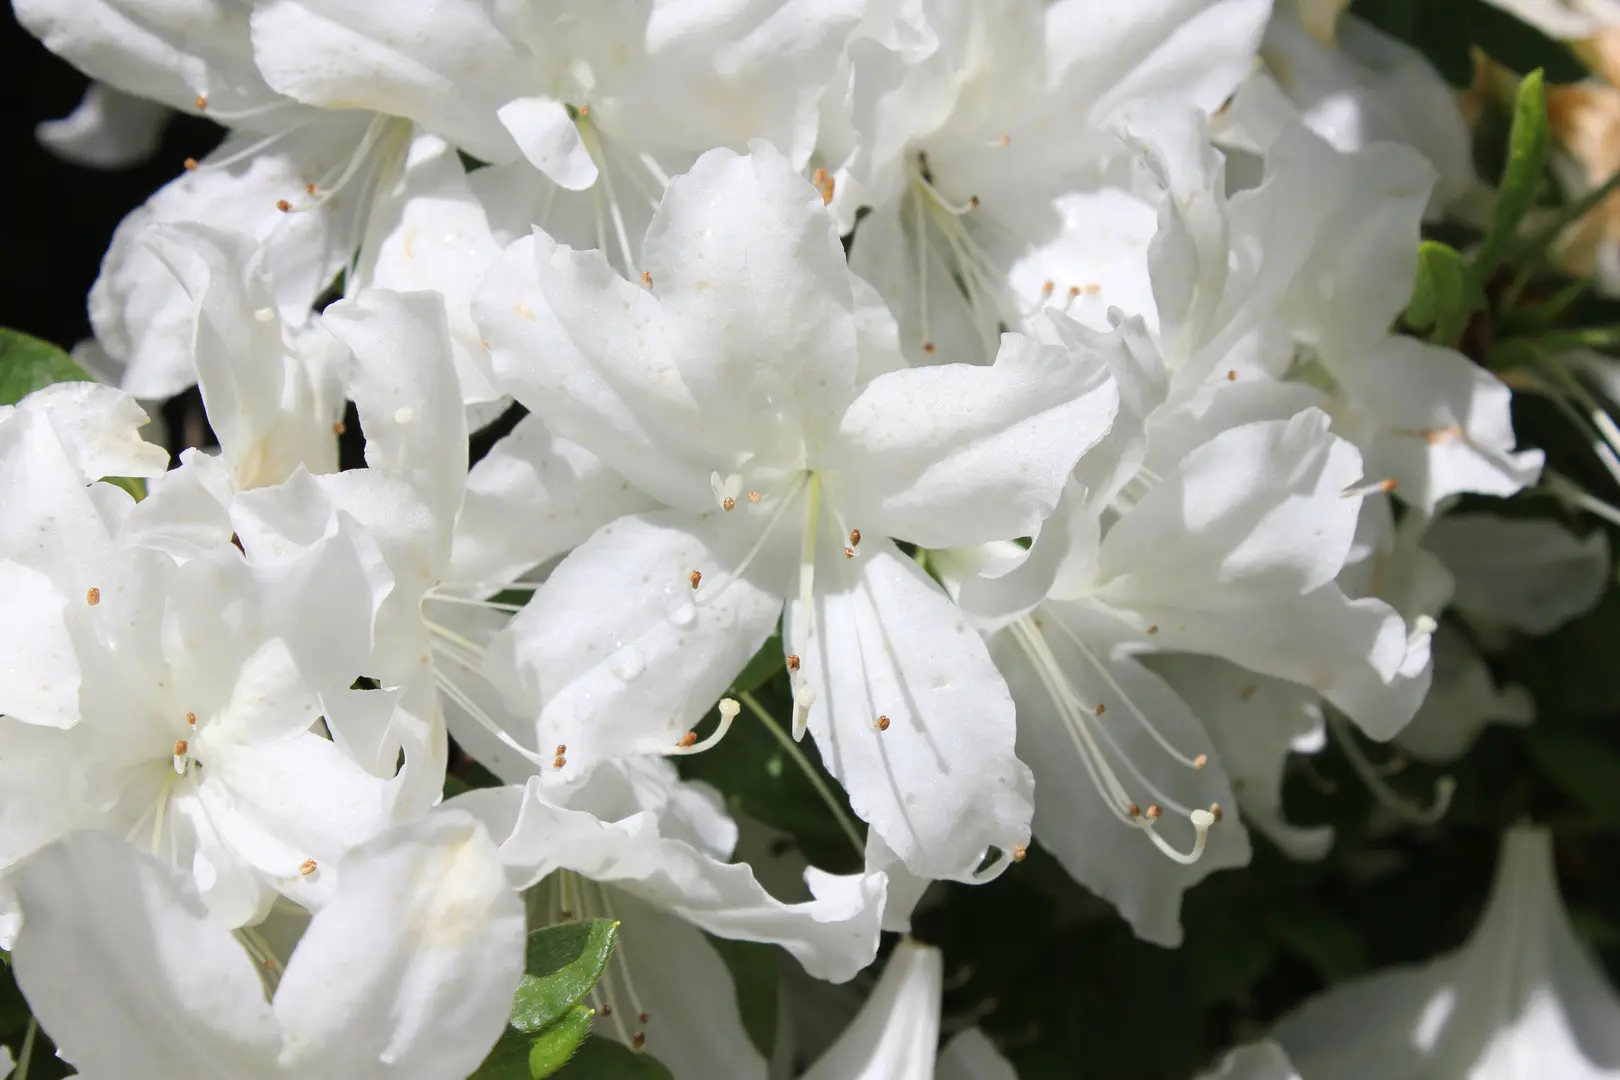 A close-up view of white flowers